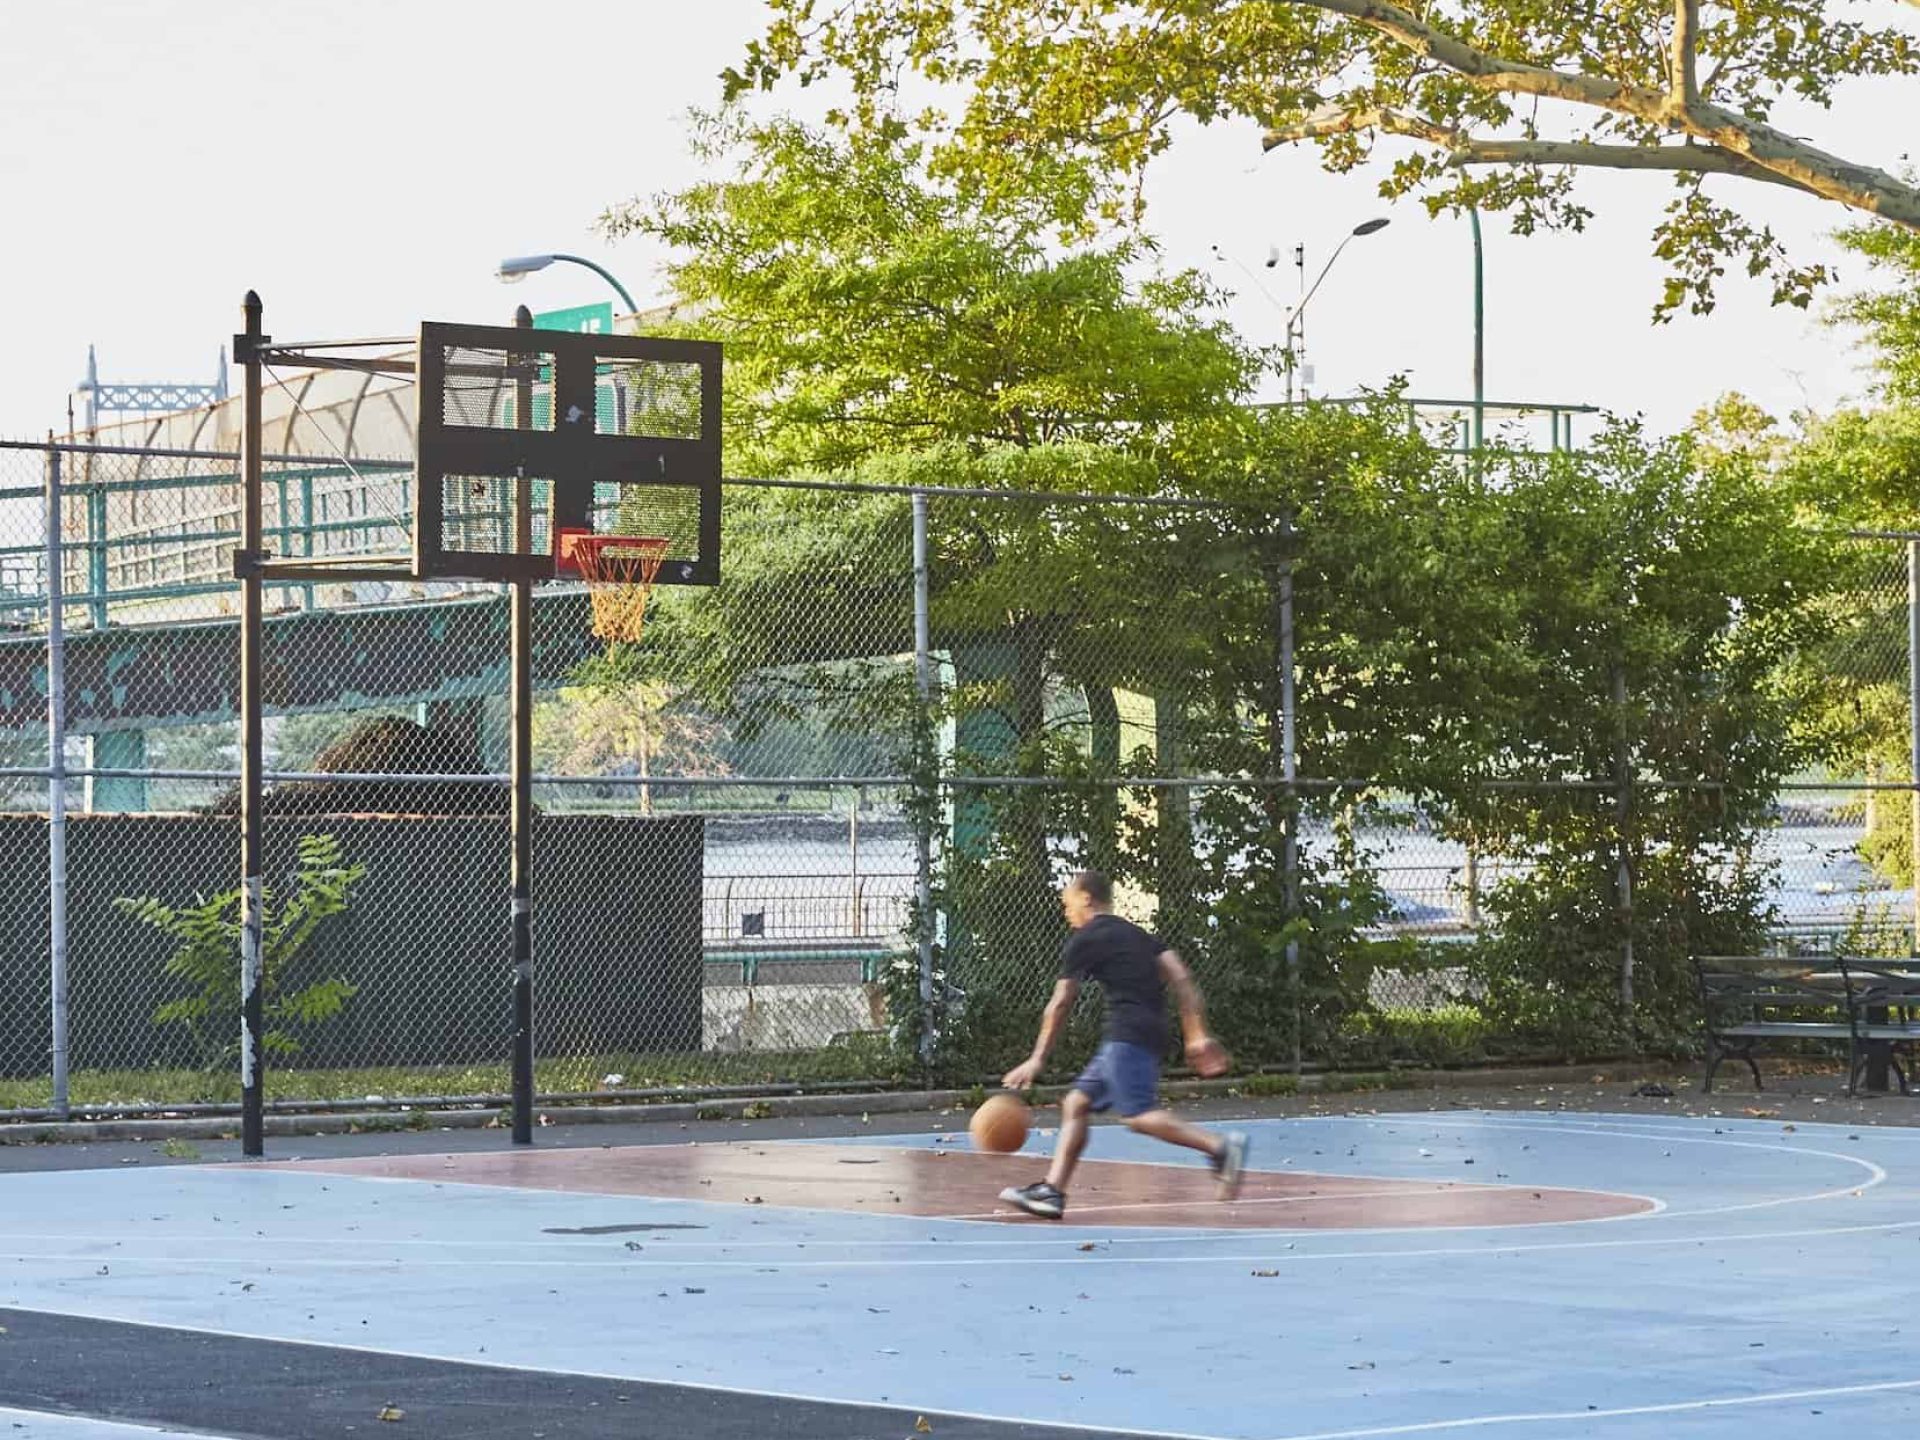 A man dribbling a basketball on a park basketball court. Fenced in basketball court with trees and walkway in the background.